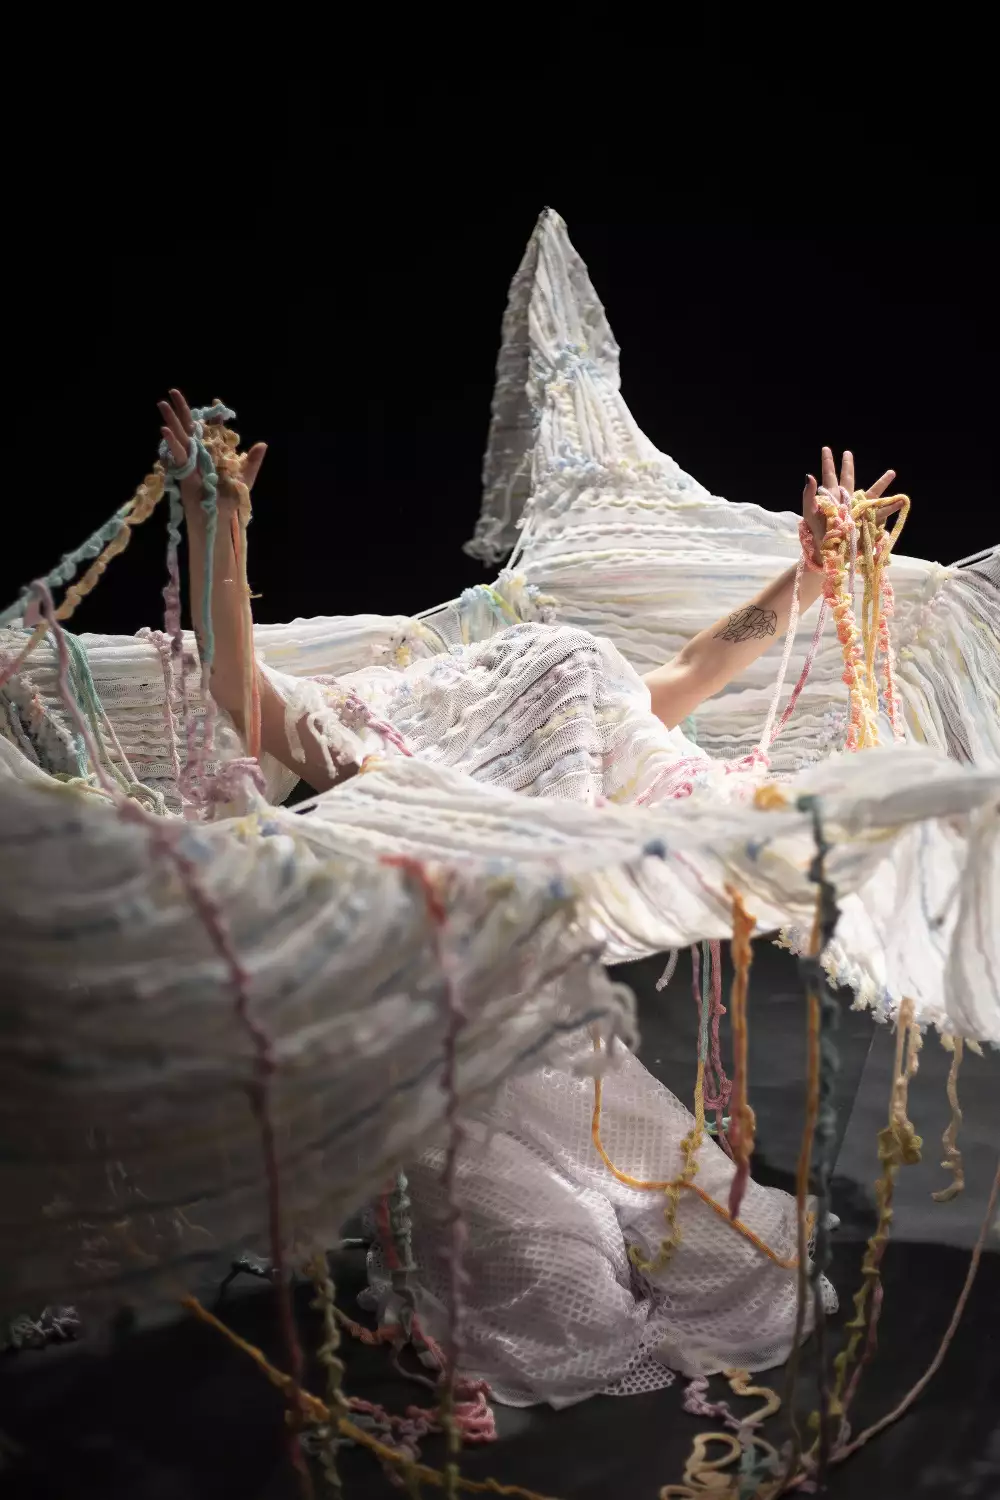 A woman tangled within a large knitted piece of yarn, performing in a dark room